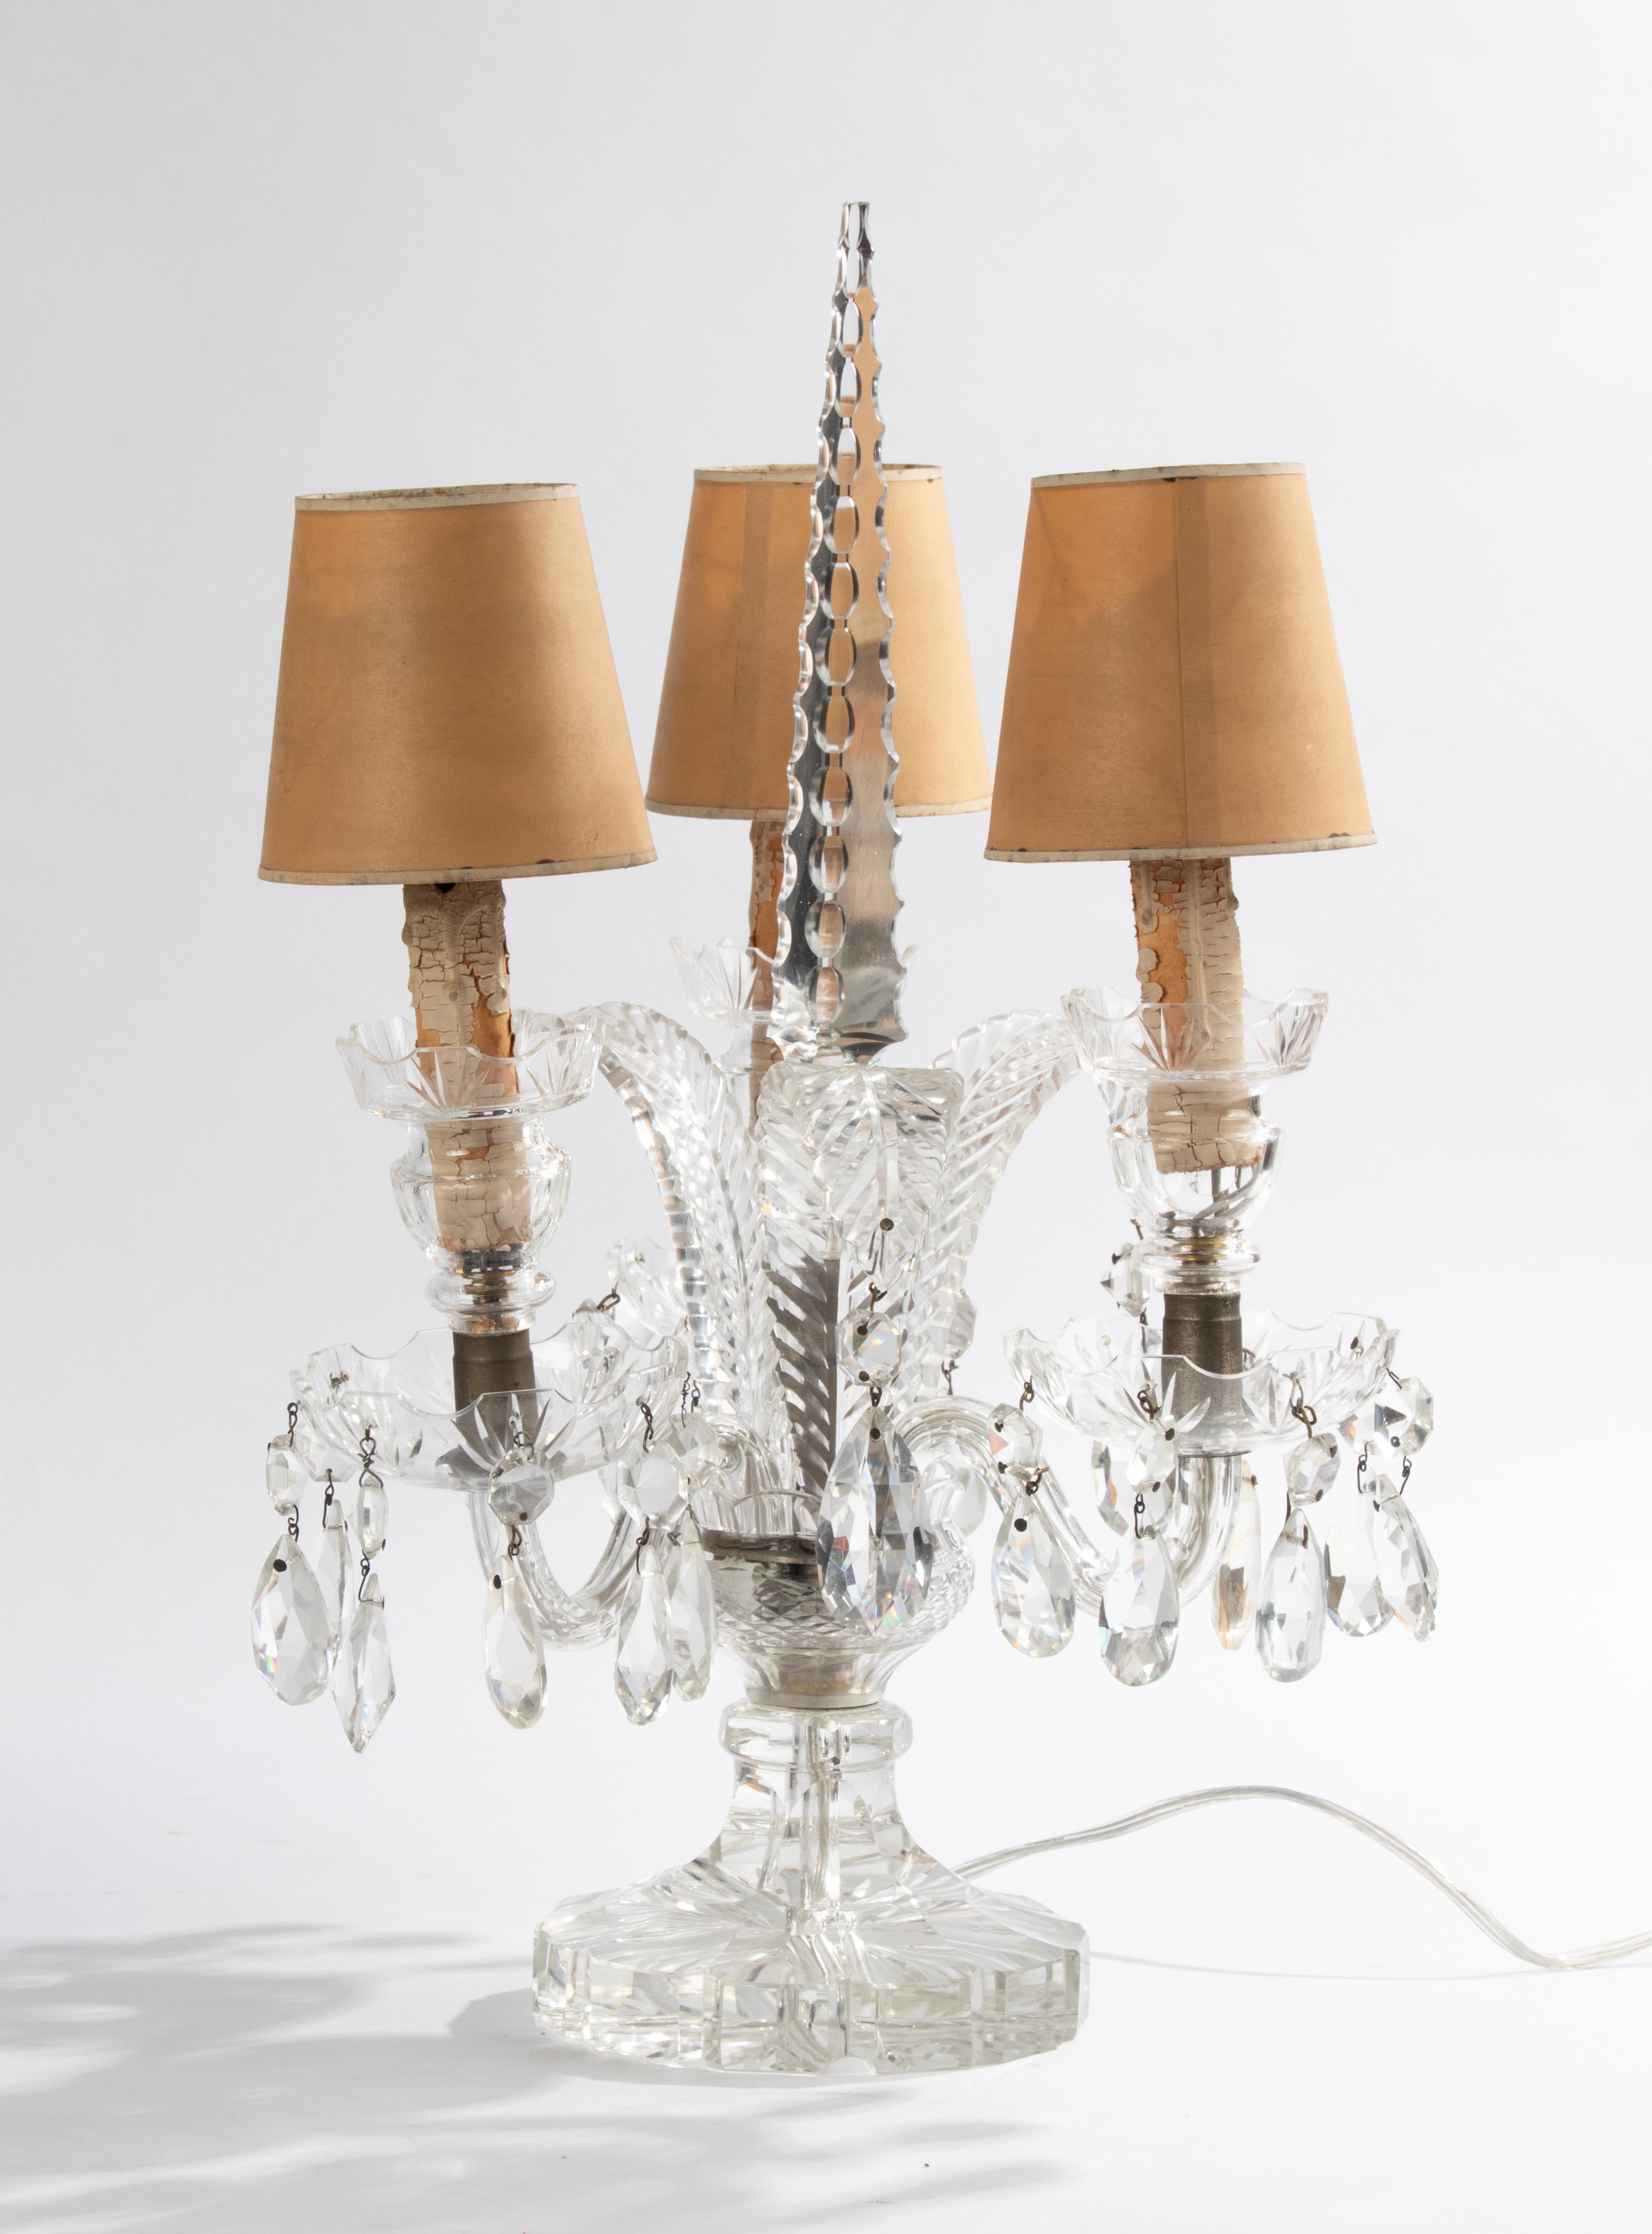 A beautiful set of 2 crystal table lamps, so called 'girandolles'. 
Very decorative shapes. With original lamp shades and paper candle holders.
Rewired, with switch and EU plug

Dimensions: 50 (h) x 30 x 30 cm
Free shipping worldwide